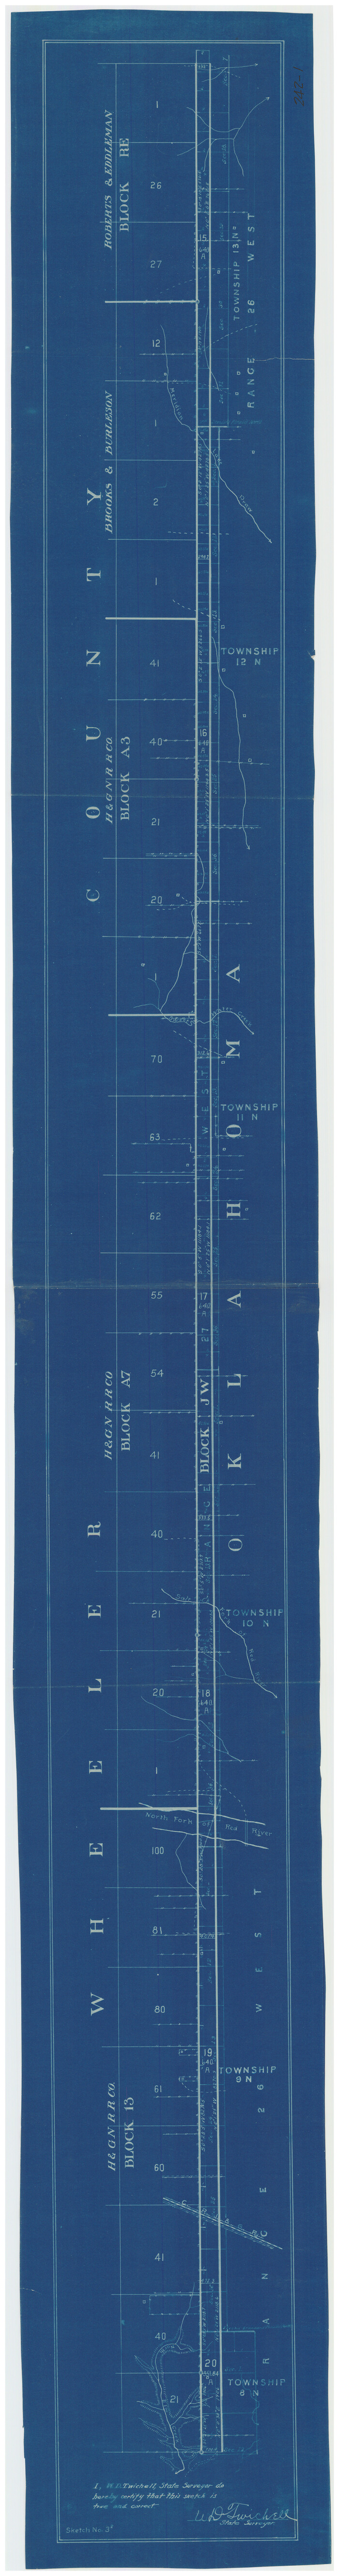 89824, [East line of Wheeler County along Oklahoma], Twichell Survey Records